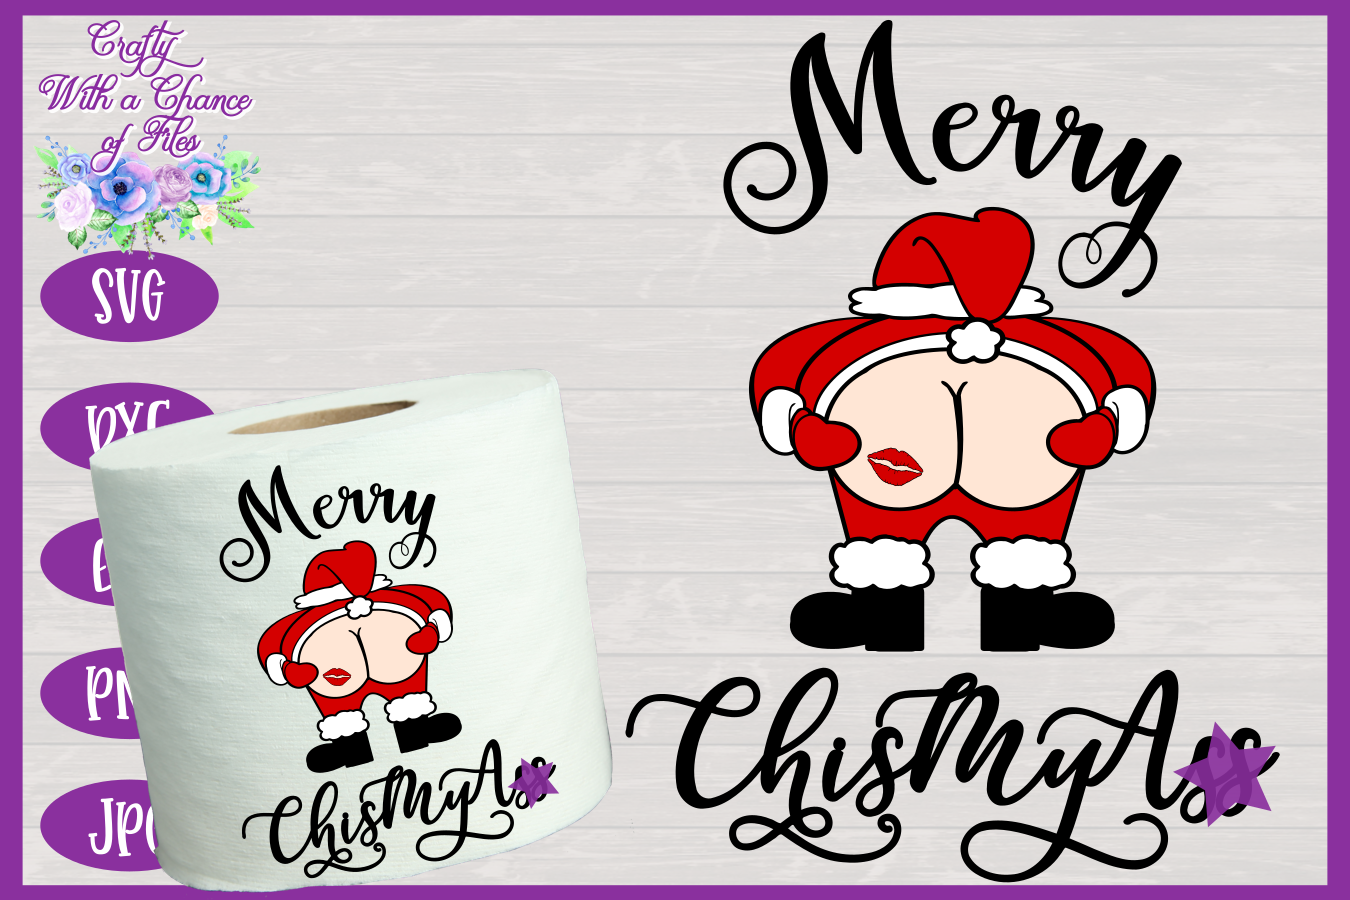 Download Christmas Svg Funny Toilet Paper Svg Christmas Gag Gift Svg By Crafty With A Chance Of Files Thehungryjpeg Com